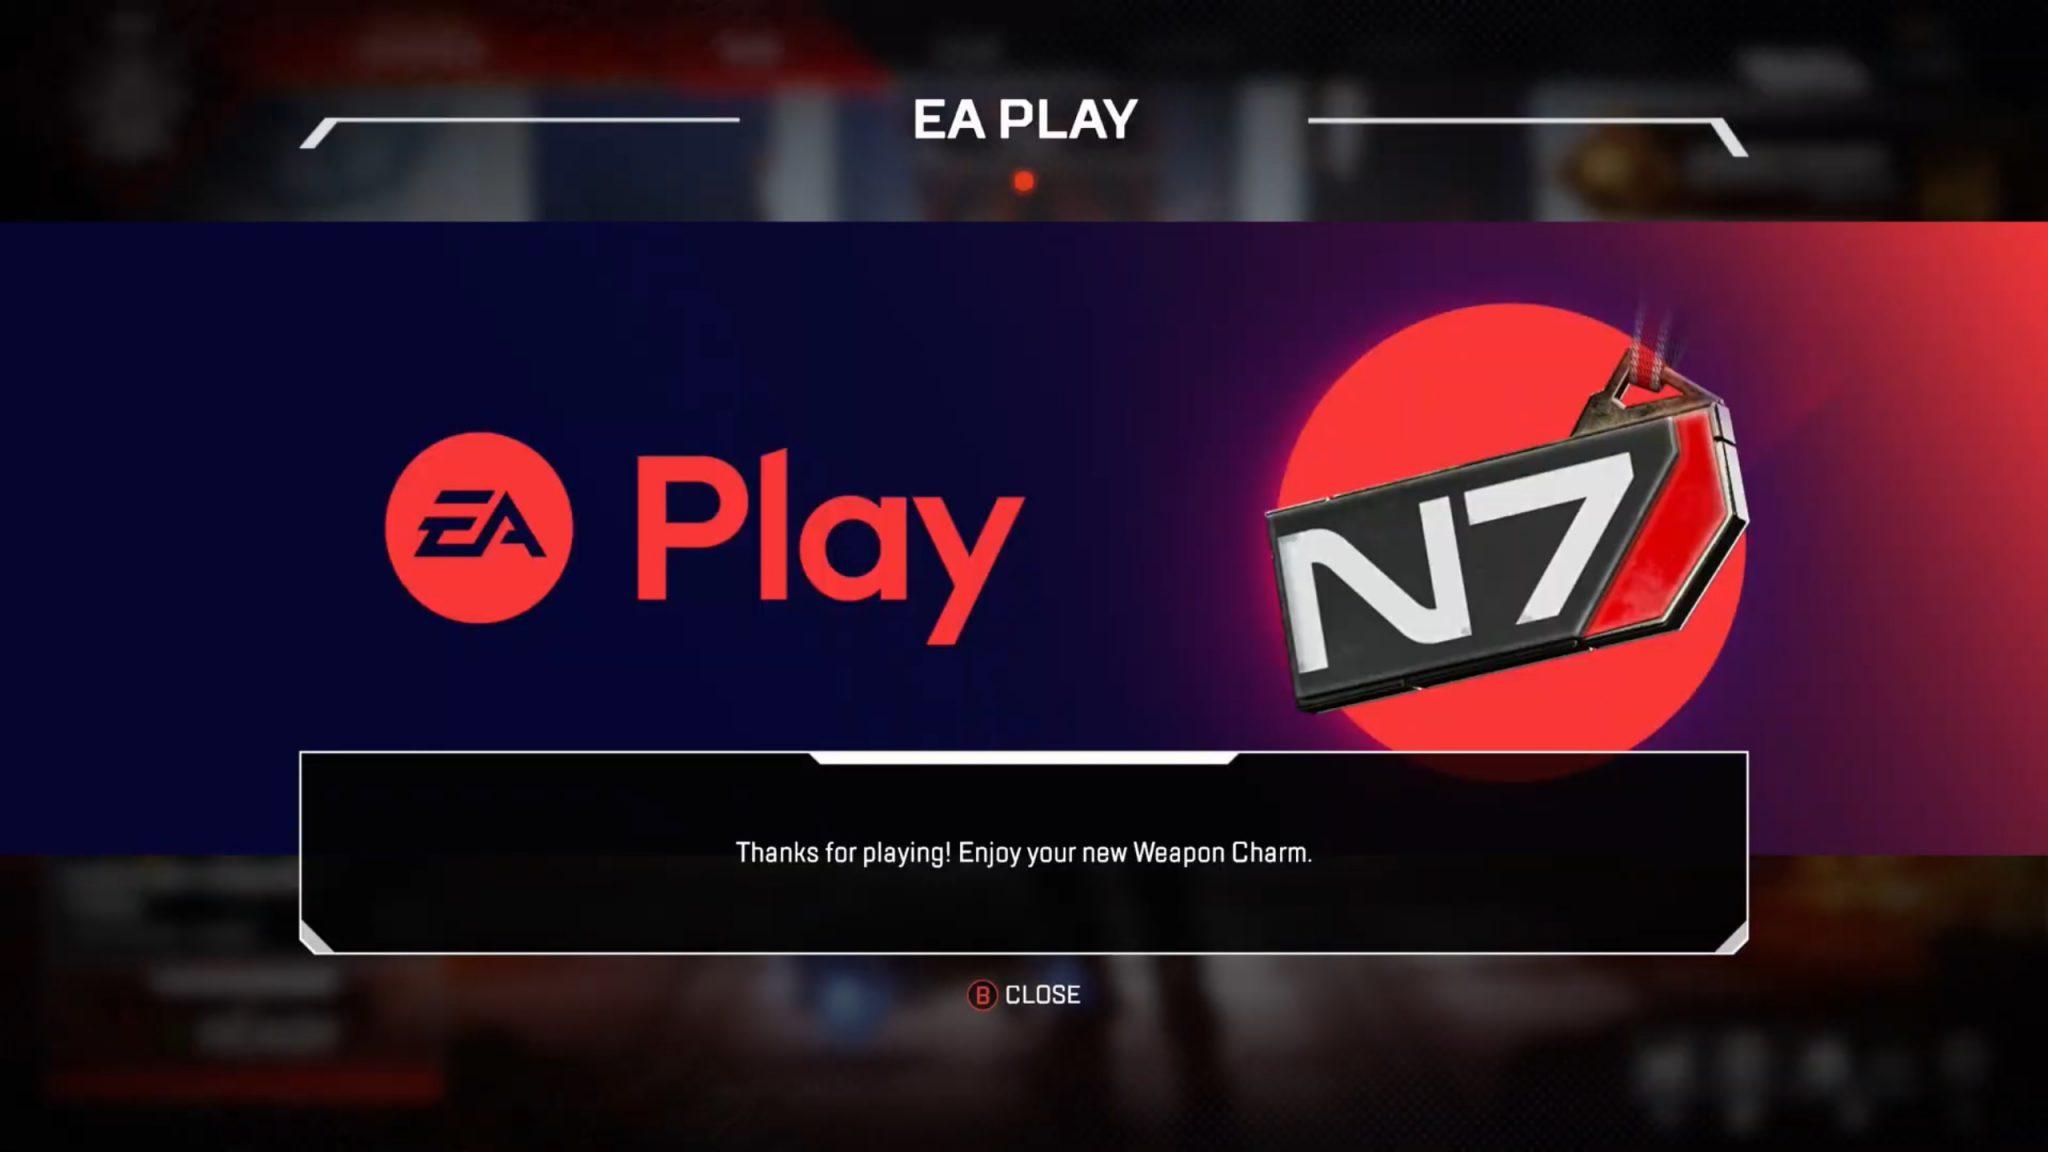 N7 Weapon charm in Apex Legends